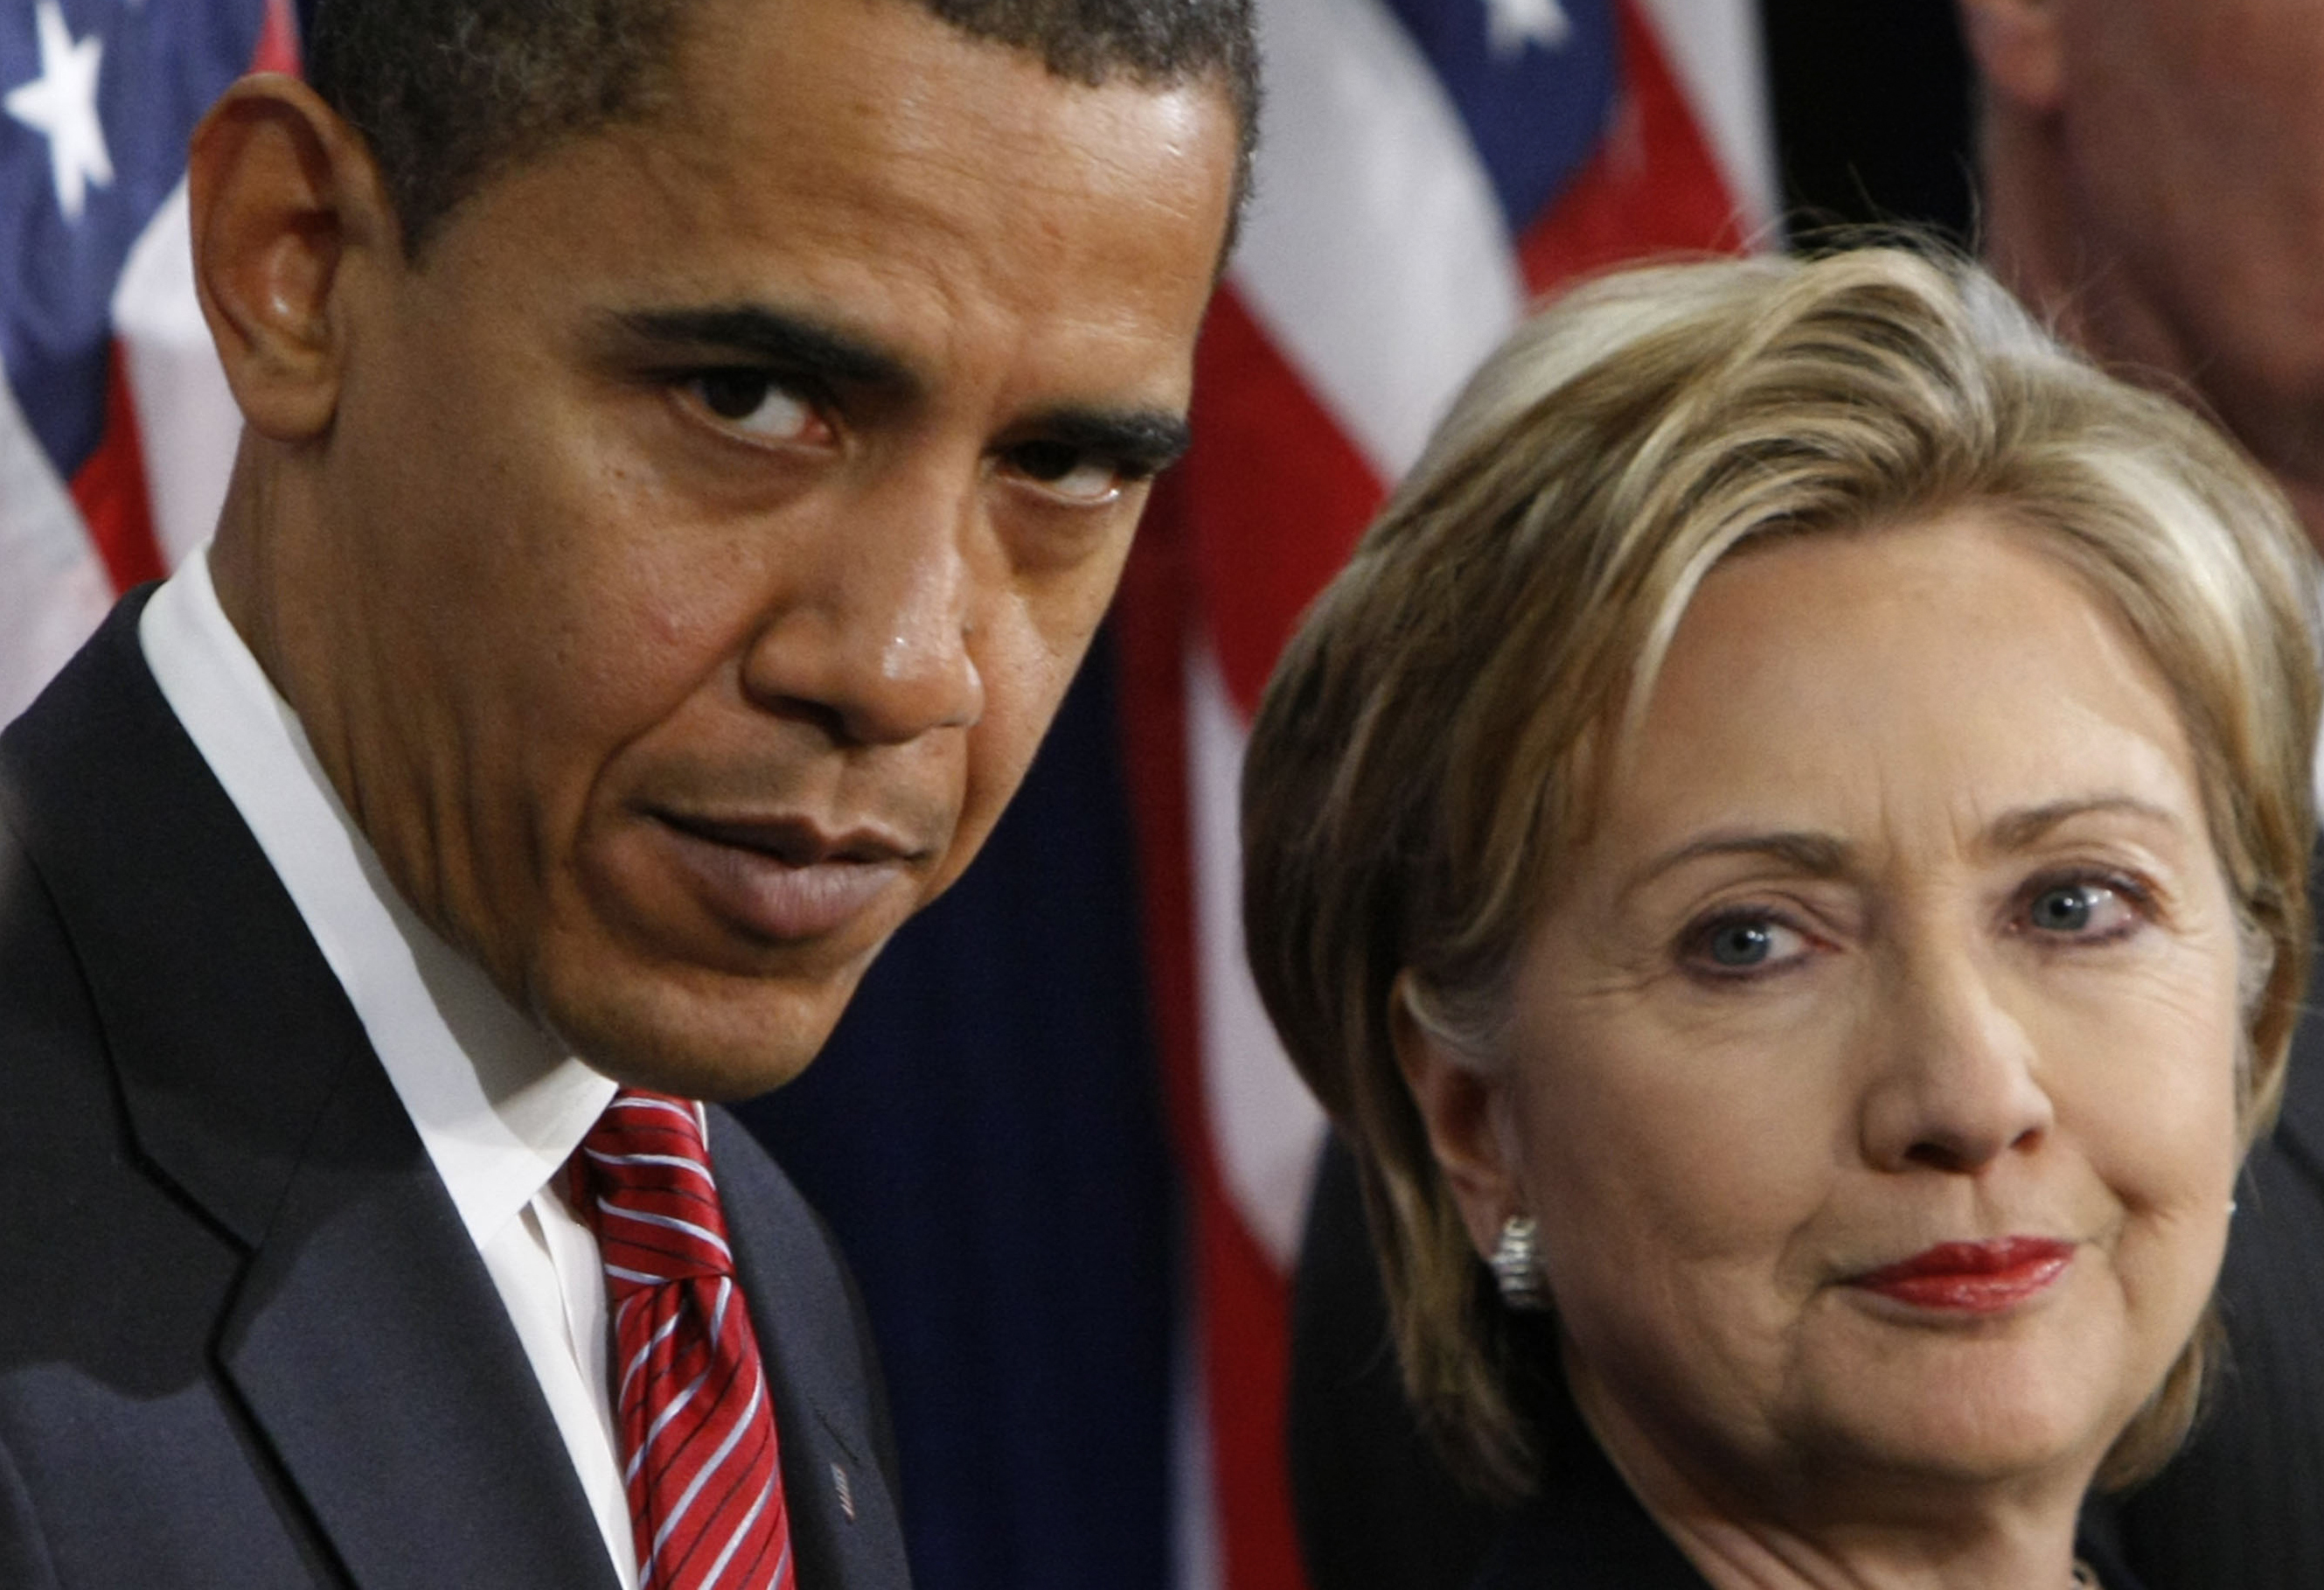 In this Dec. 1, 2008, file photo, then-President-elect Barack Obama, left, stands with then-Sen. Hillary Rodham Clinton, D-N.Y., after announcing that she is his choice as Secretary of State during a news conference in Chicago. President Barack Obama formally endorsed Hillary Clinton's bid for the White House on Thursday, June 9, 2016, praising his former secretary of state's experience and grit, and urging Democrats to unite behind her in the fight against Republicans in the fall. (AP Photo/Pablo Martinez Monsivais, File)